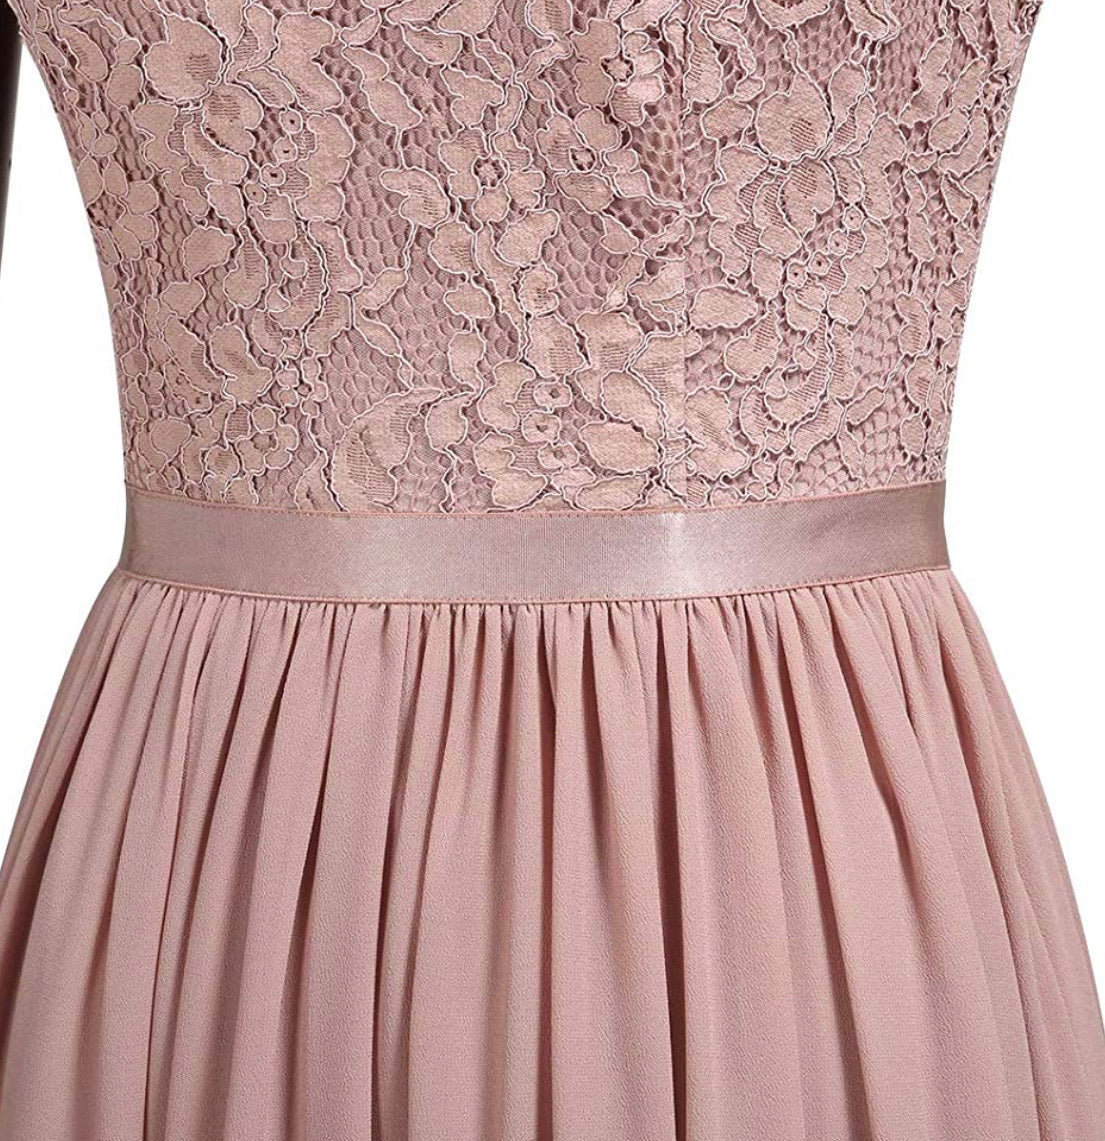 Formal Floral Lace Long Length Dress, Sizes Small - 2XLarge (Pink Dress)